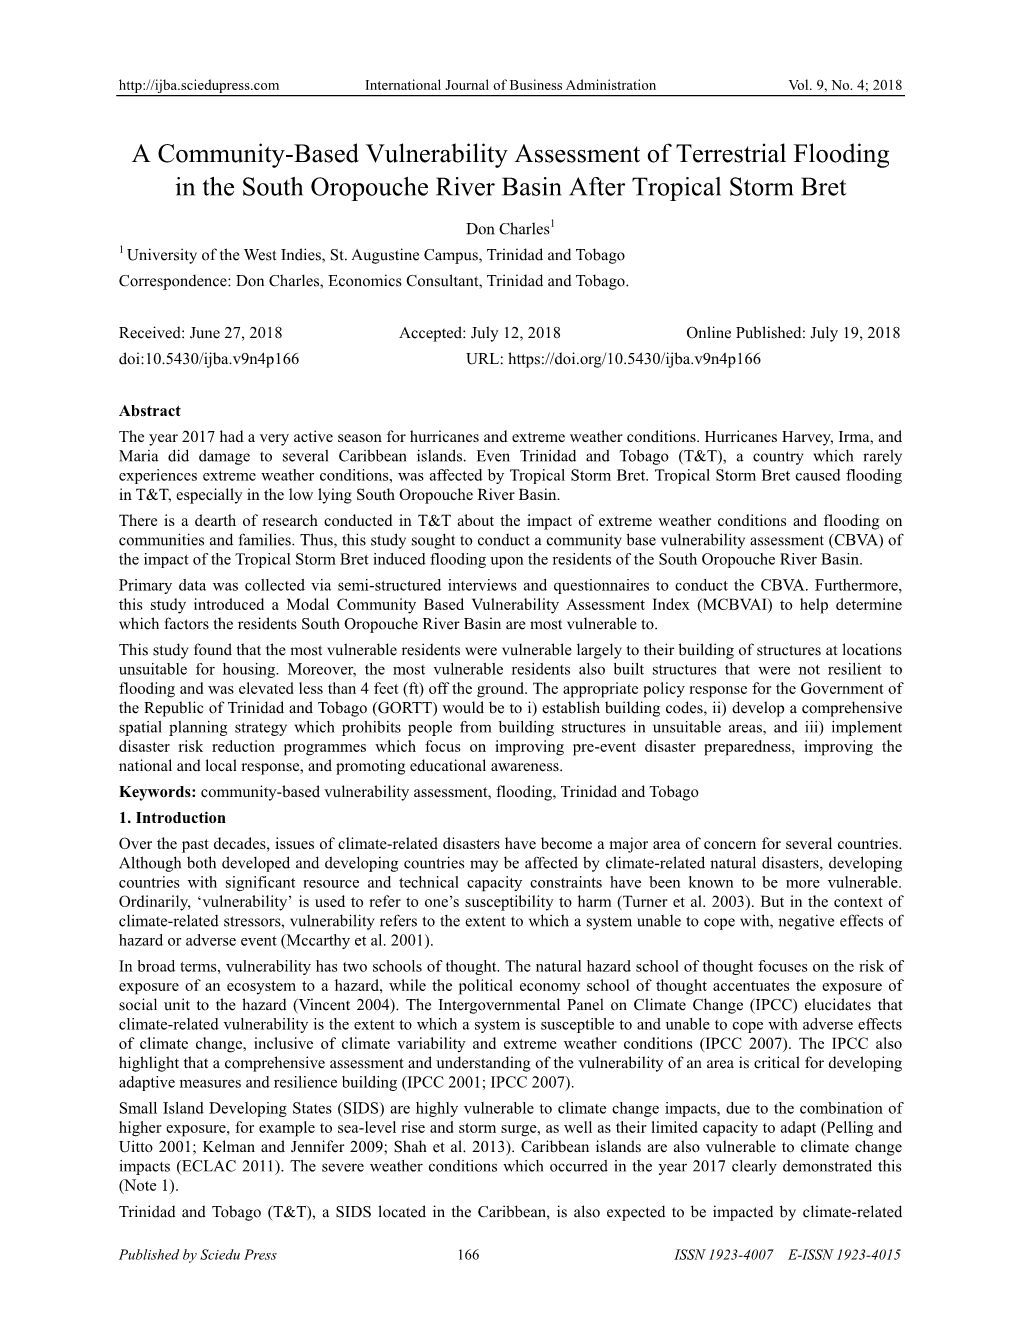 A Community-Based Vulnerability Assessment of Terrestrial Flooding in the South Oropouche River Basin After Tropical Storm Bret